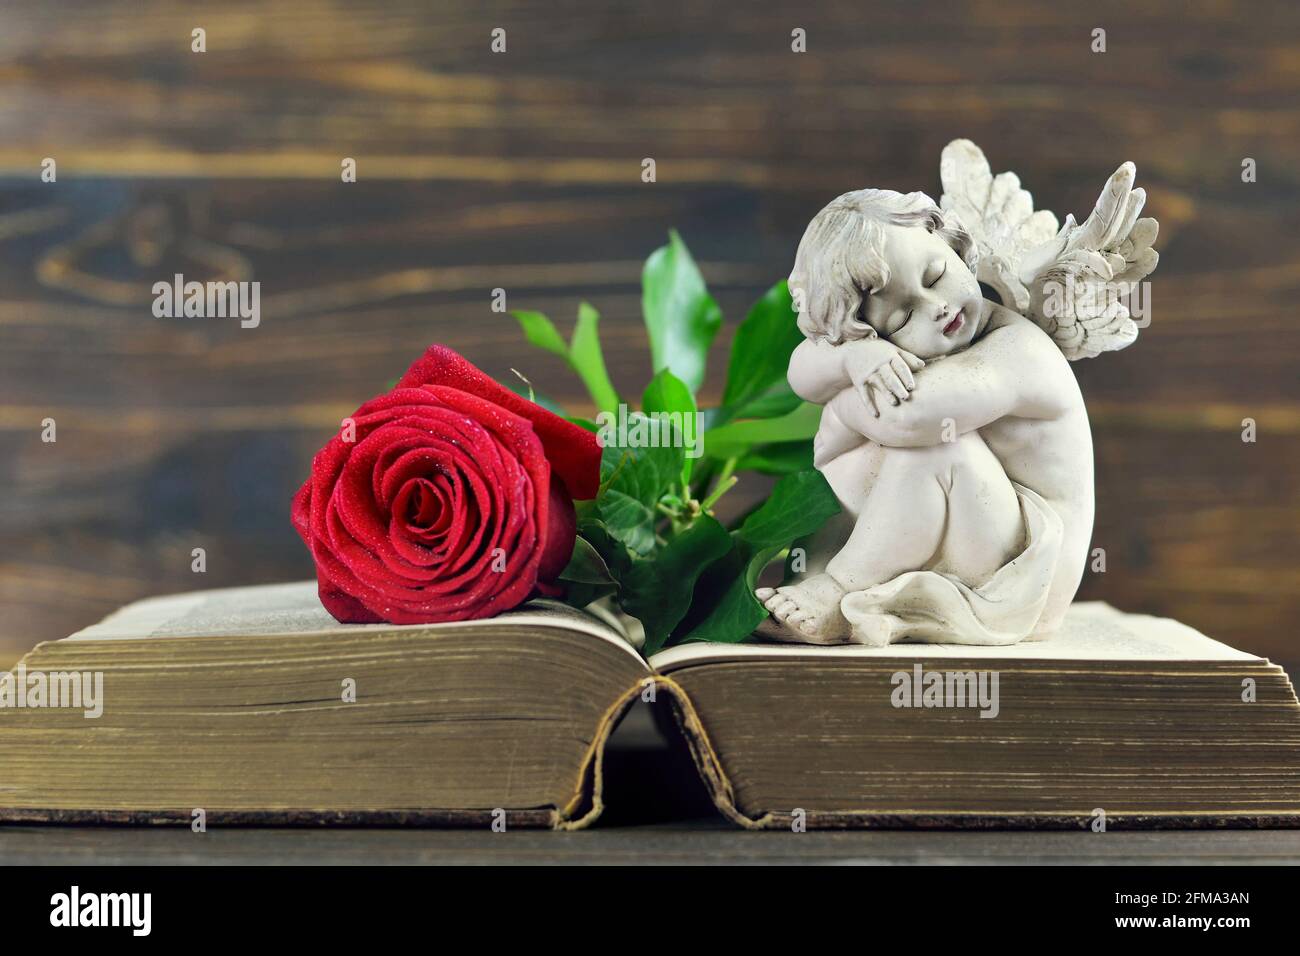 Sympathy card with sleeping angel and red rose on open book Stock Photo